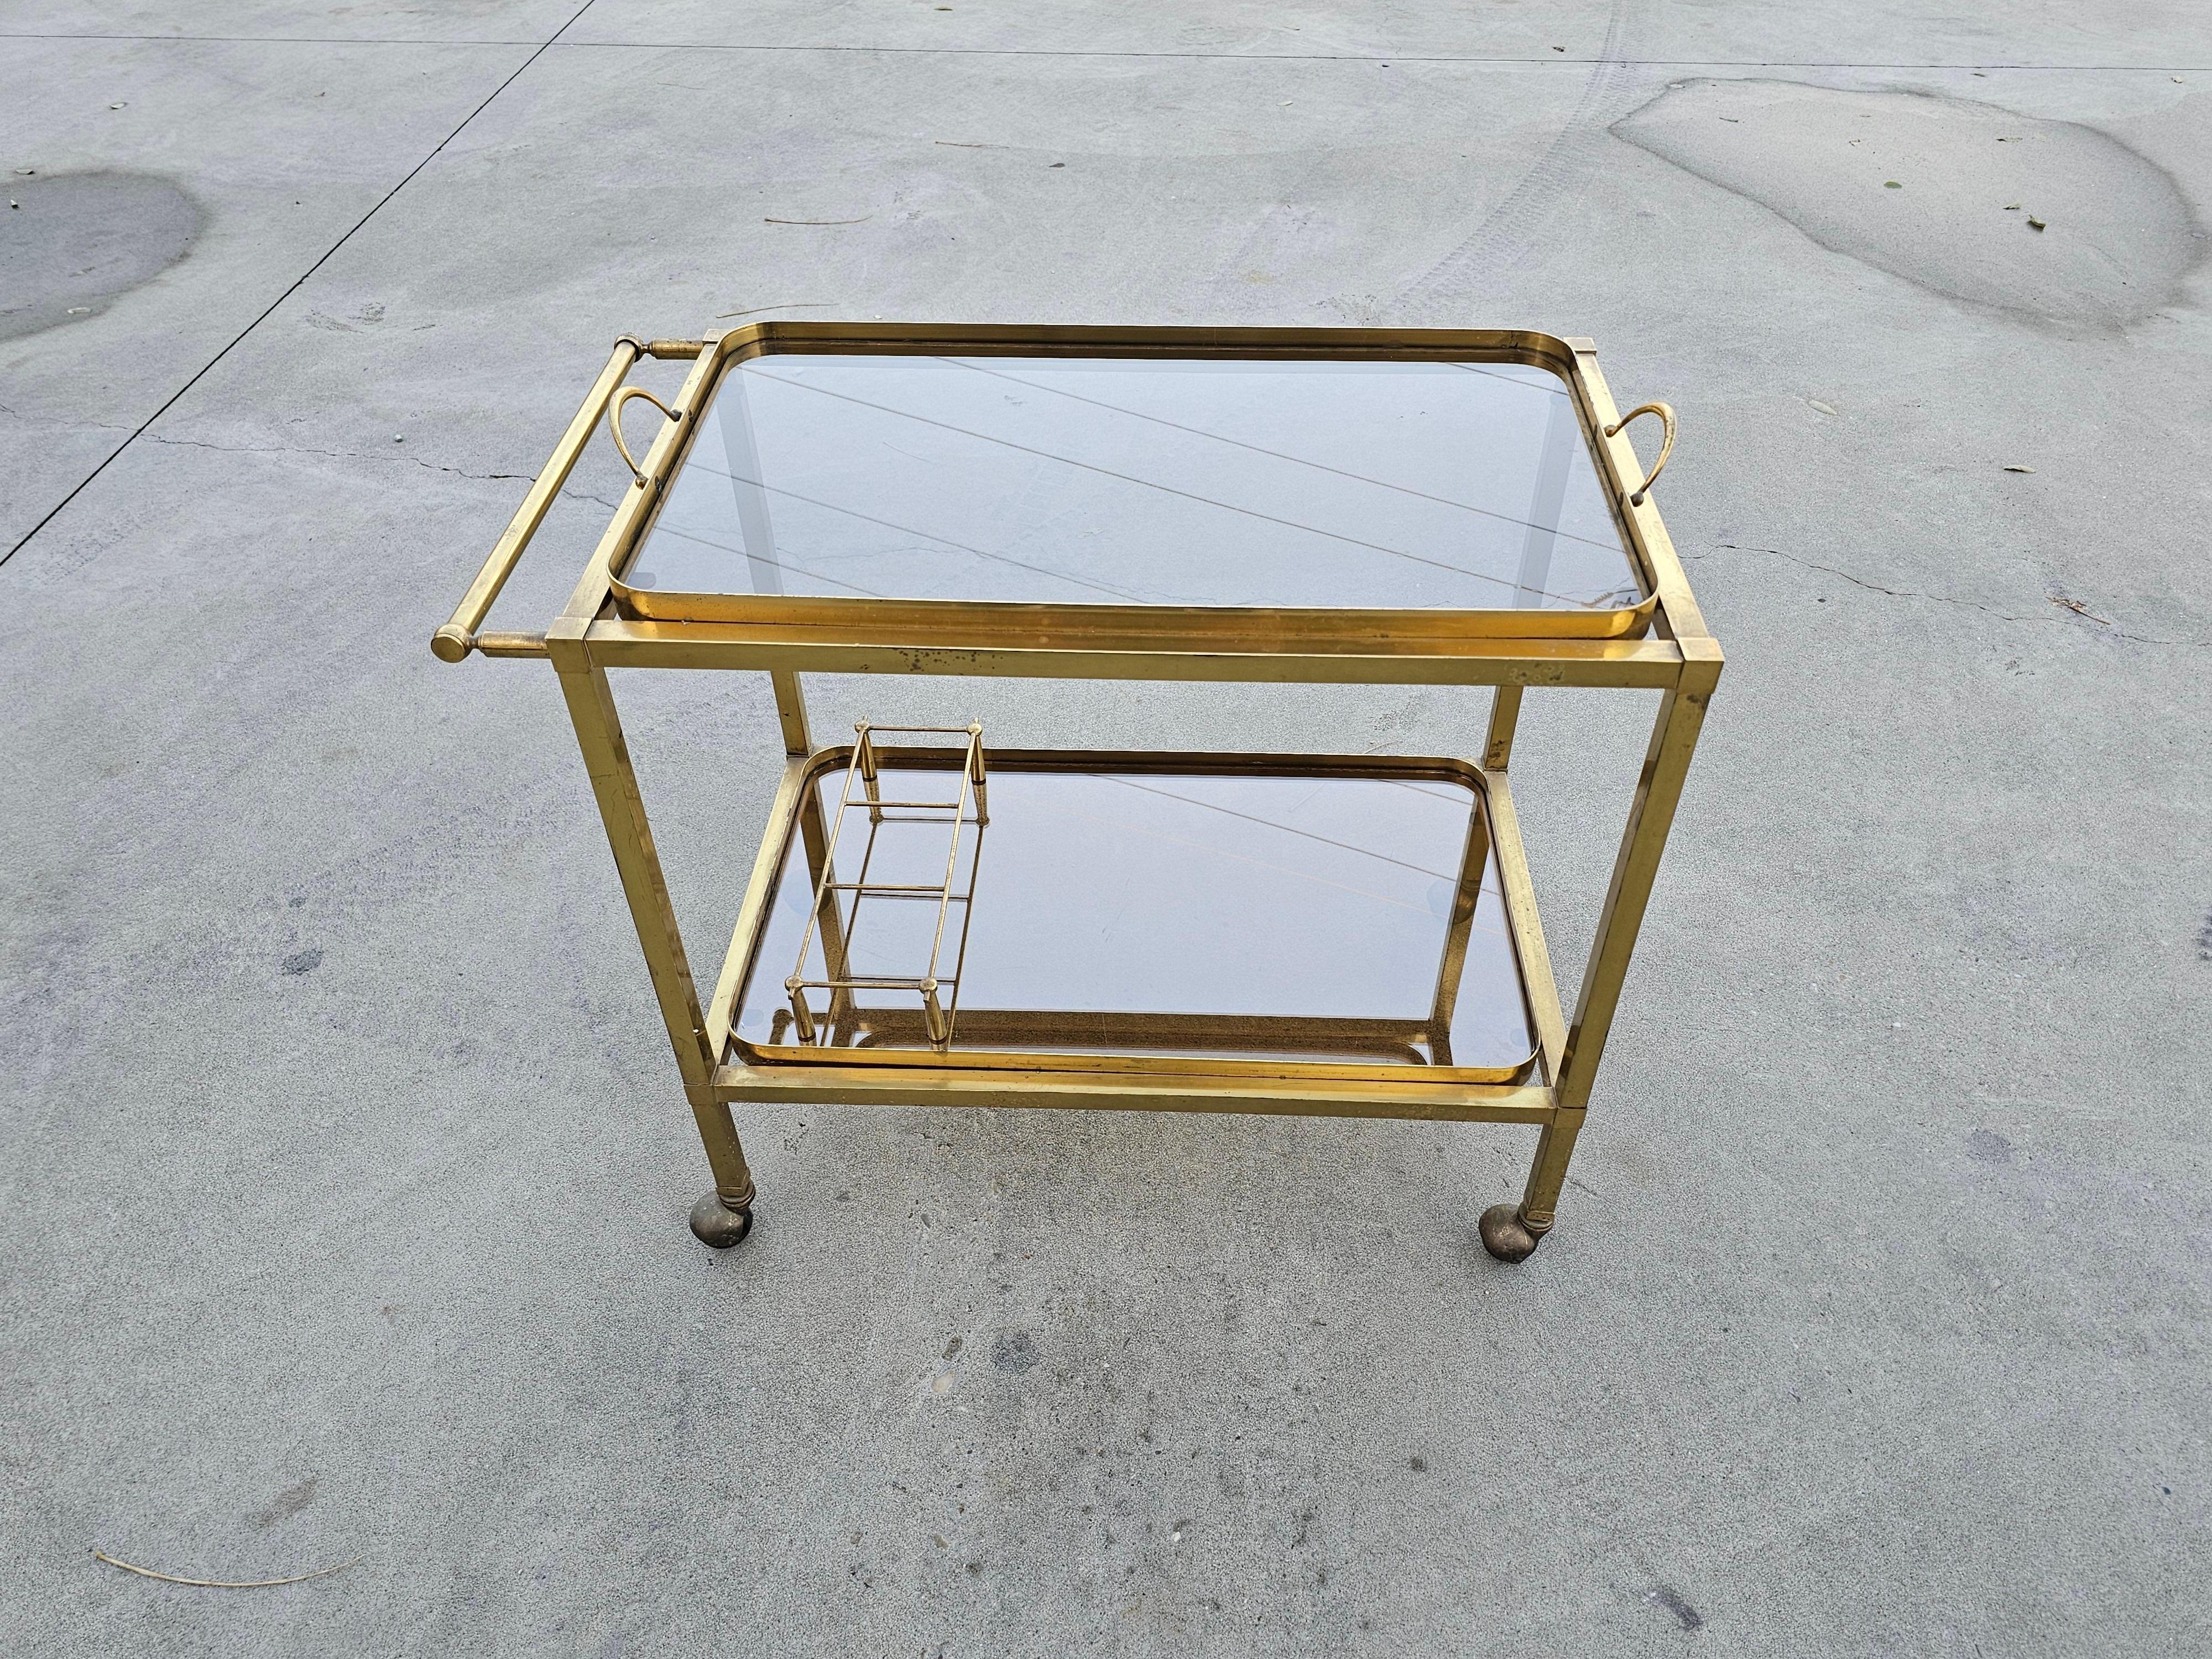 In this listing you will find a gorgeous and luxurious late Art Deco 2-Tier Bar Cart done in gilt bronze, with smoked glass tops. The top tier can be taken off and used as a serving tray, as seen in one of the pictures. Attr. to Maison Bagués. Made